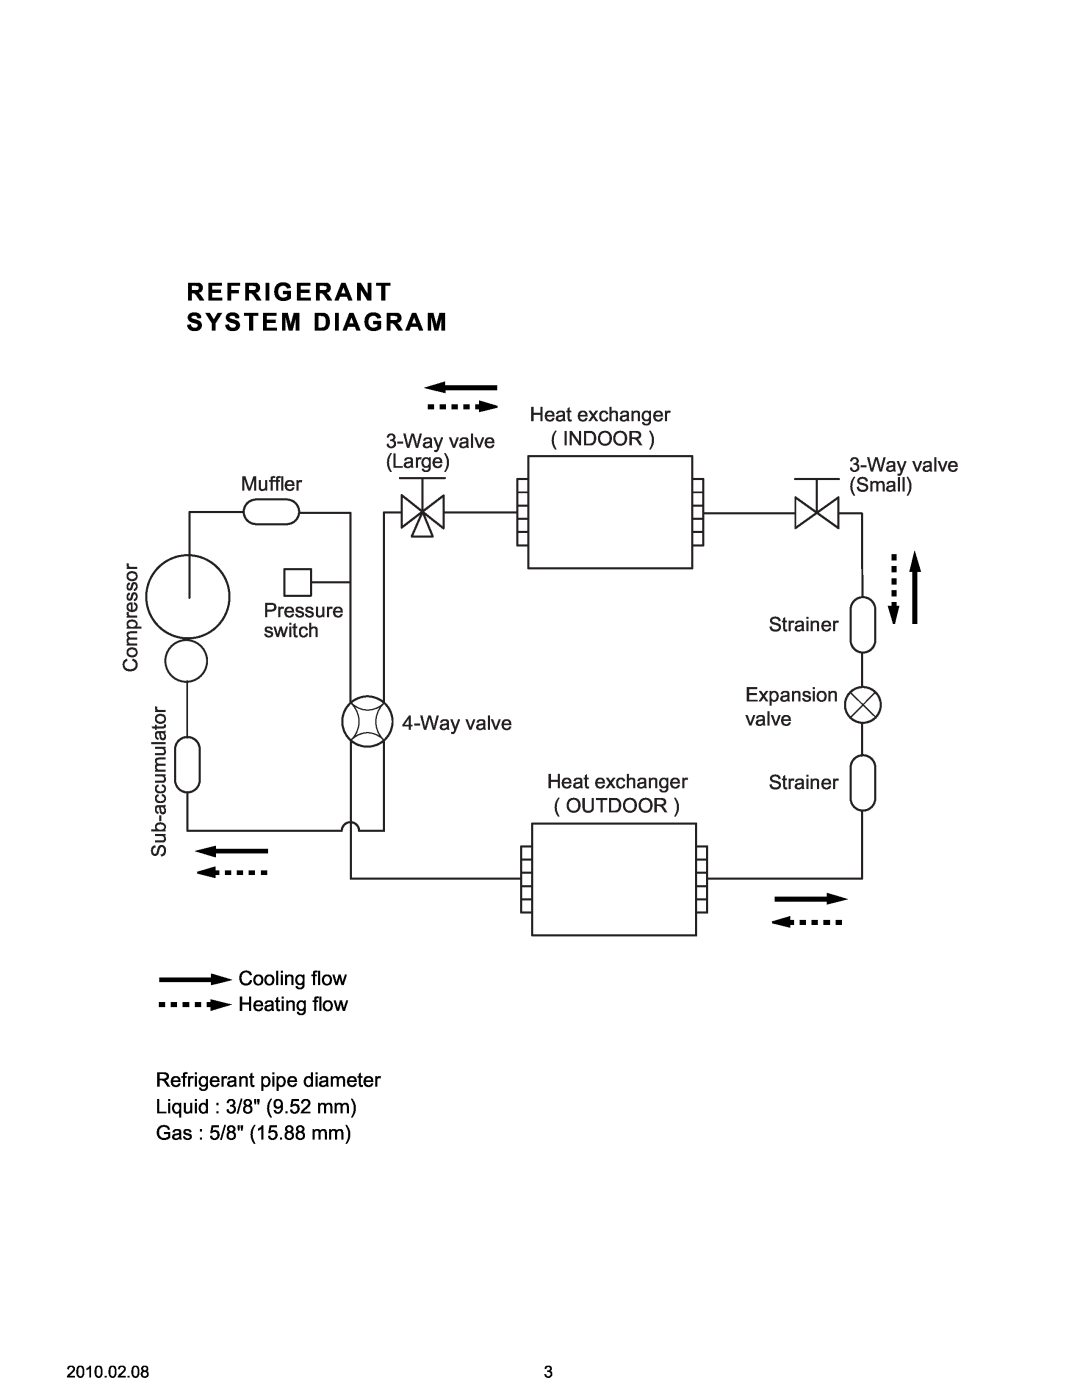 Friedrich MW24Y3H specifications Refrigerant System Diagram, Cooling flow Heating flow 